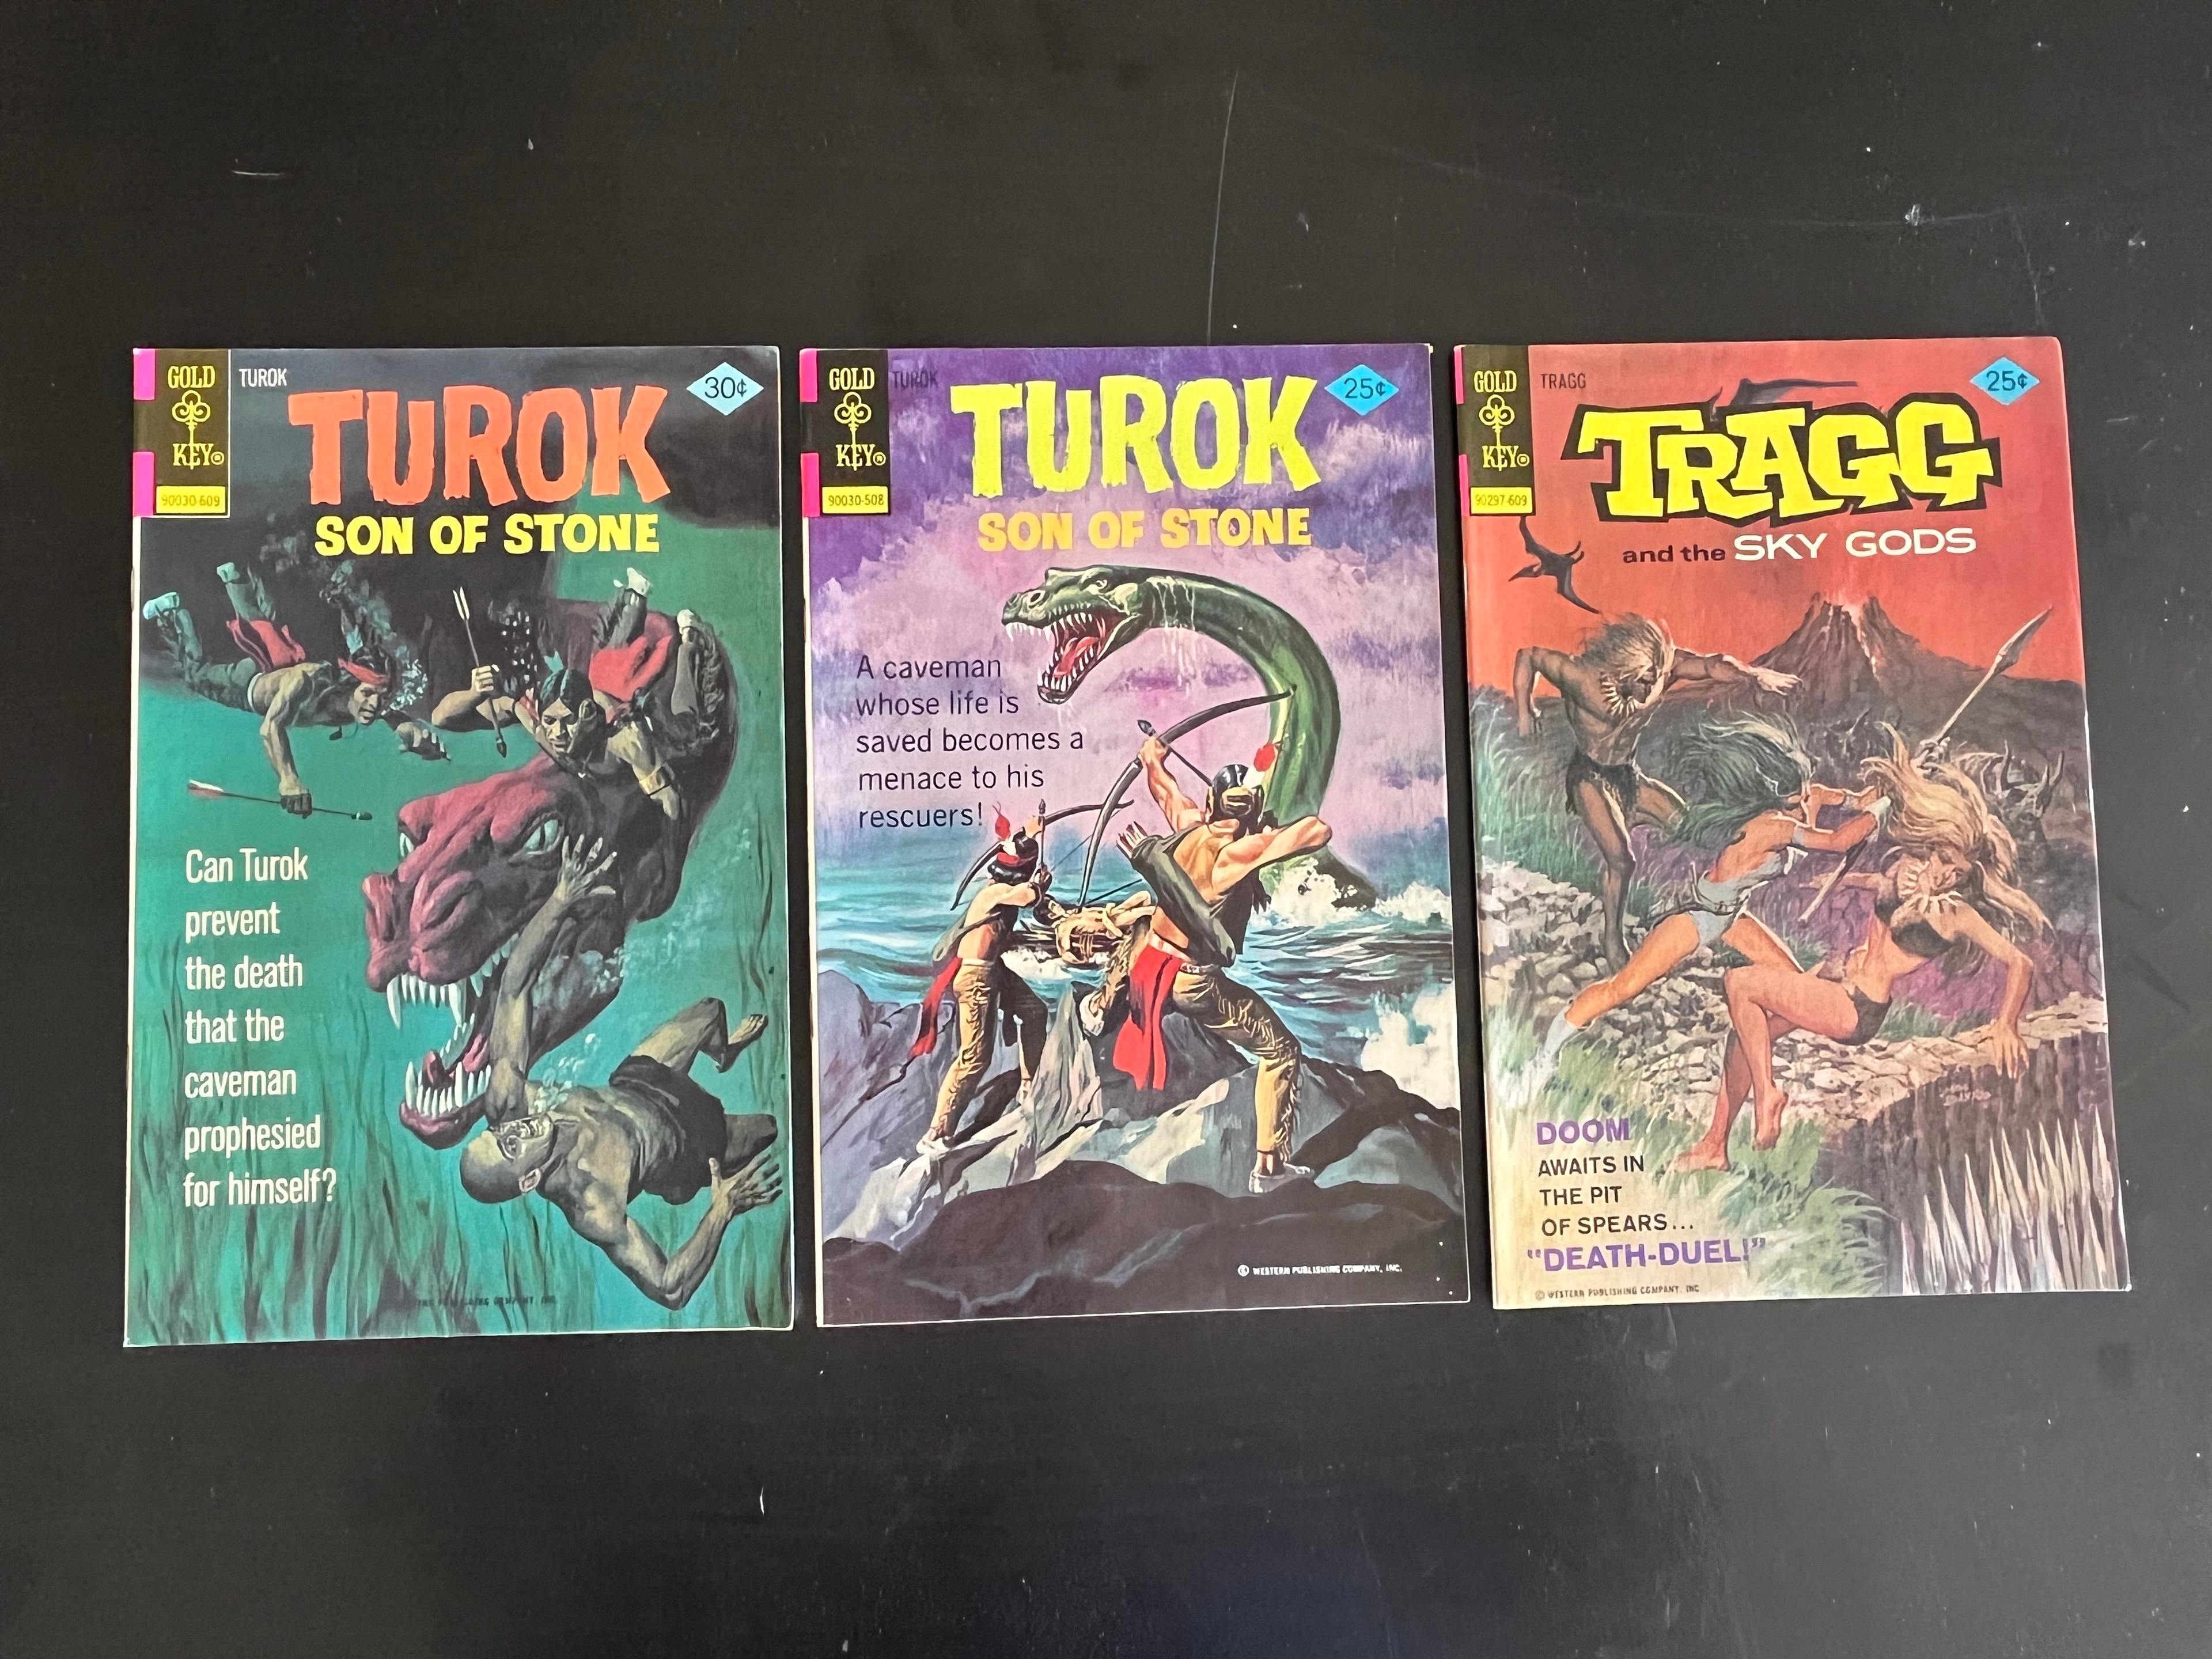 Tragg & Turok/Gold Key Comics Group of (3) Bronze Age Issues